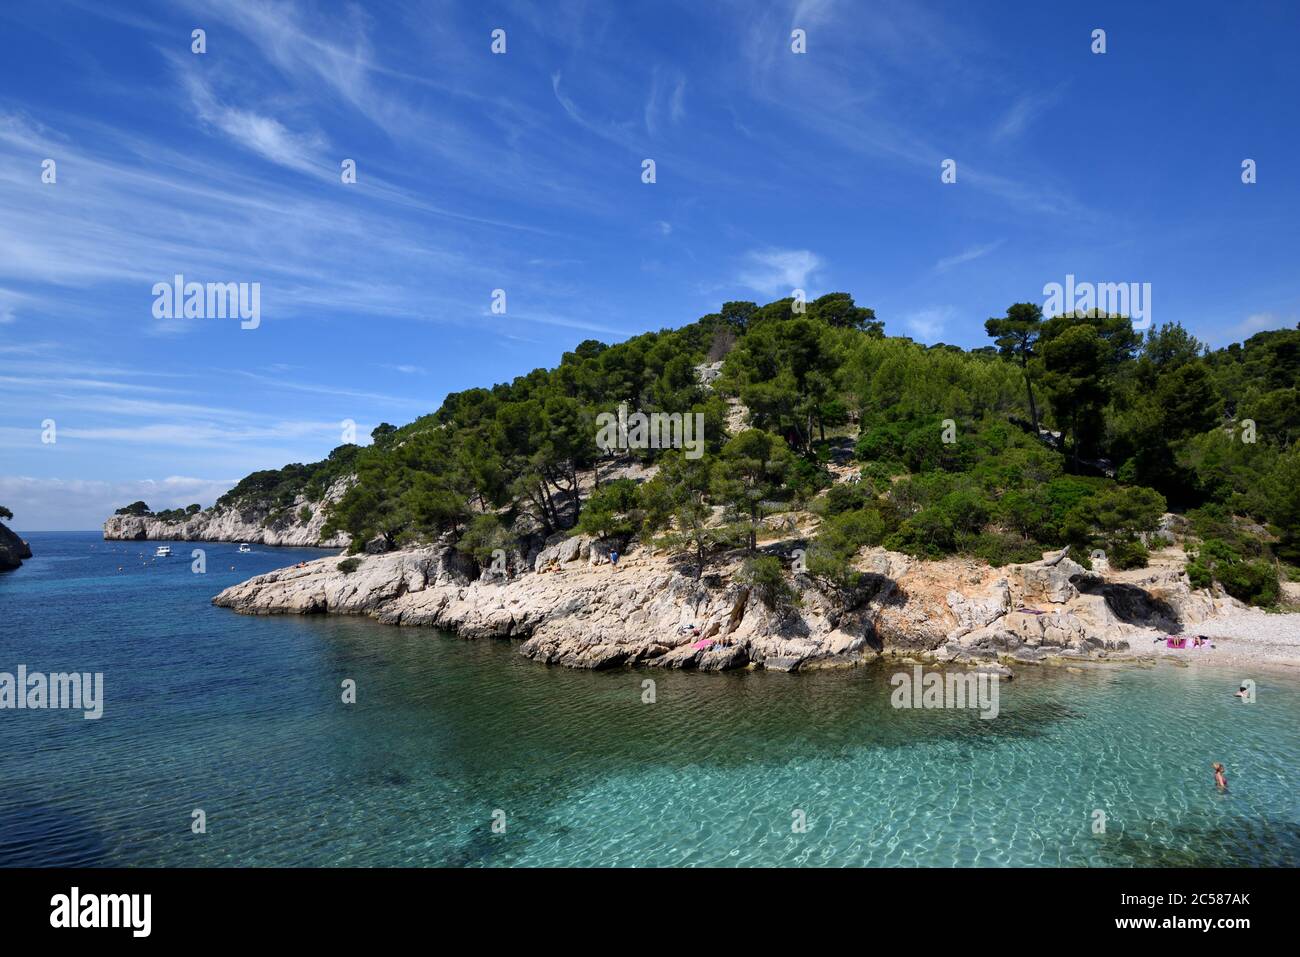 Calanque Port-Pin & Pine Trees in Fjord-like Cove des Calanques National Park Cassis Provence Frankreich Stockfoto